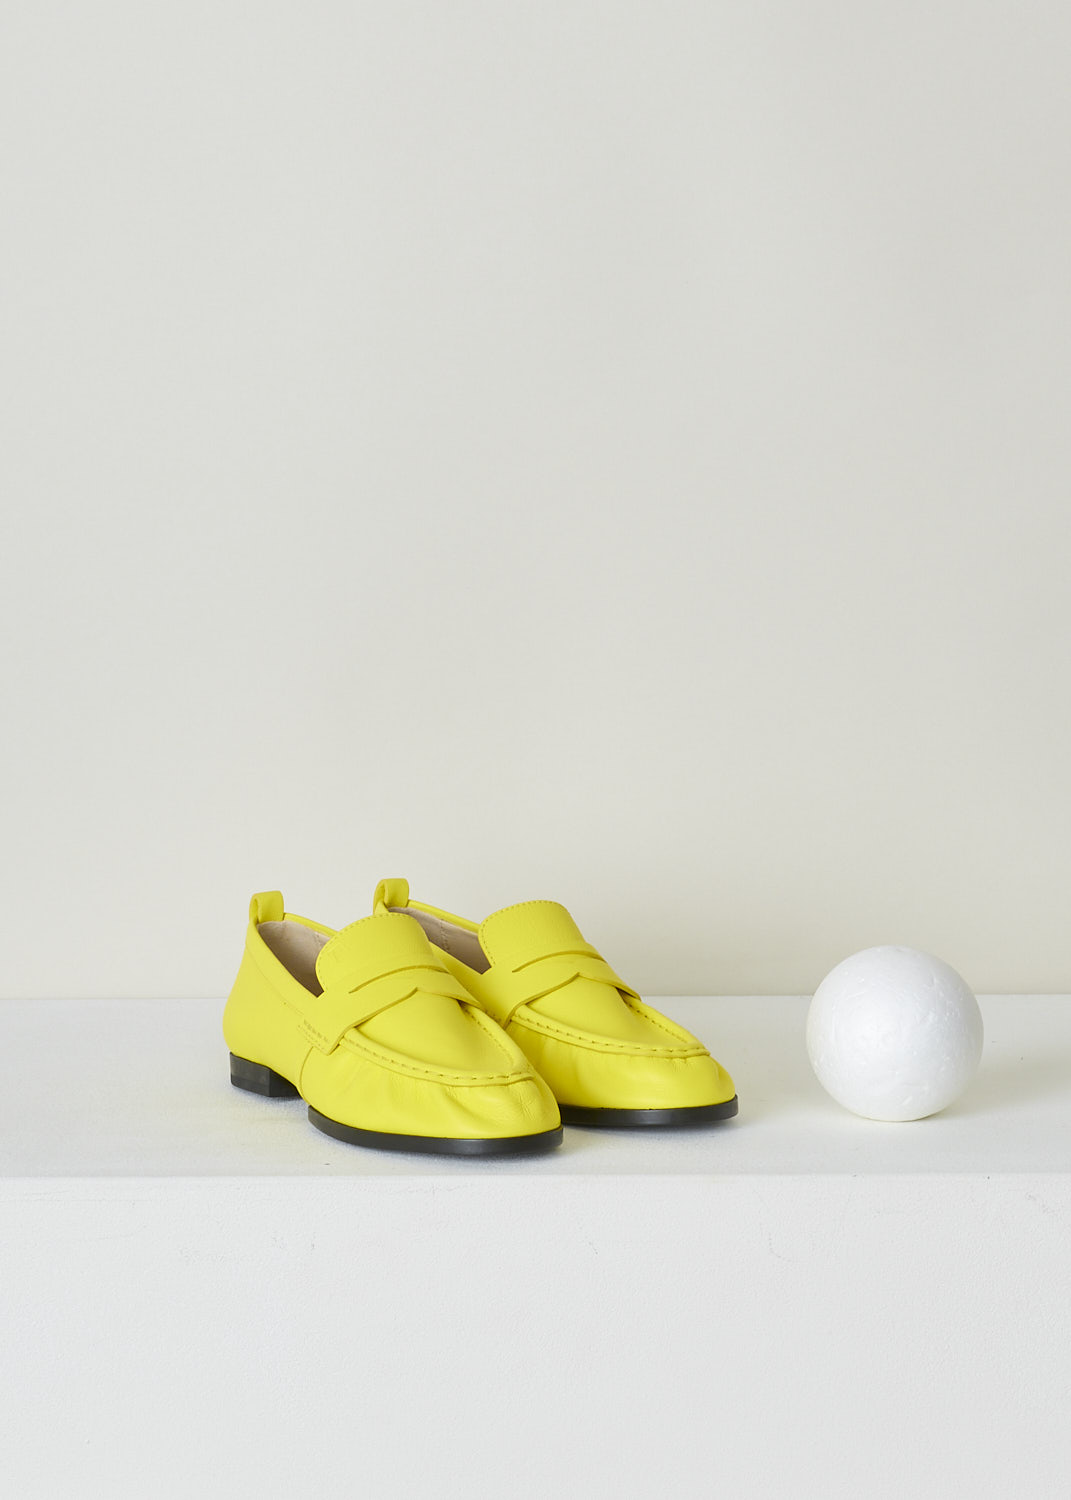 TODS, BRIGHT YELLOW PENNY LOAFERS, XXW02E0EC60PHXG009_PHX_HOLIDAY, Yellow, Front, These bright yellow slip-on penny loafers have a rounded toe and a decorative slotted leather strip over the upper side. Around the trim, the leather is subtly pleated. These loafers have black soles.
